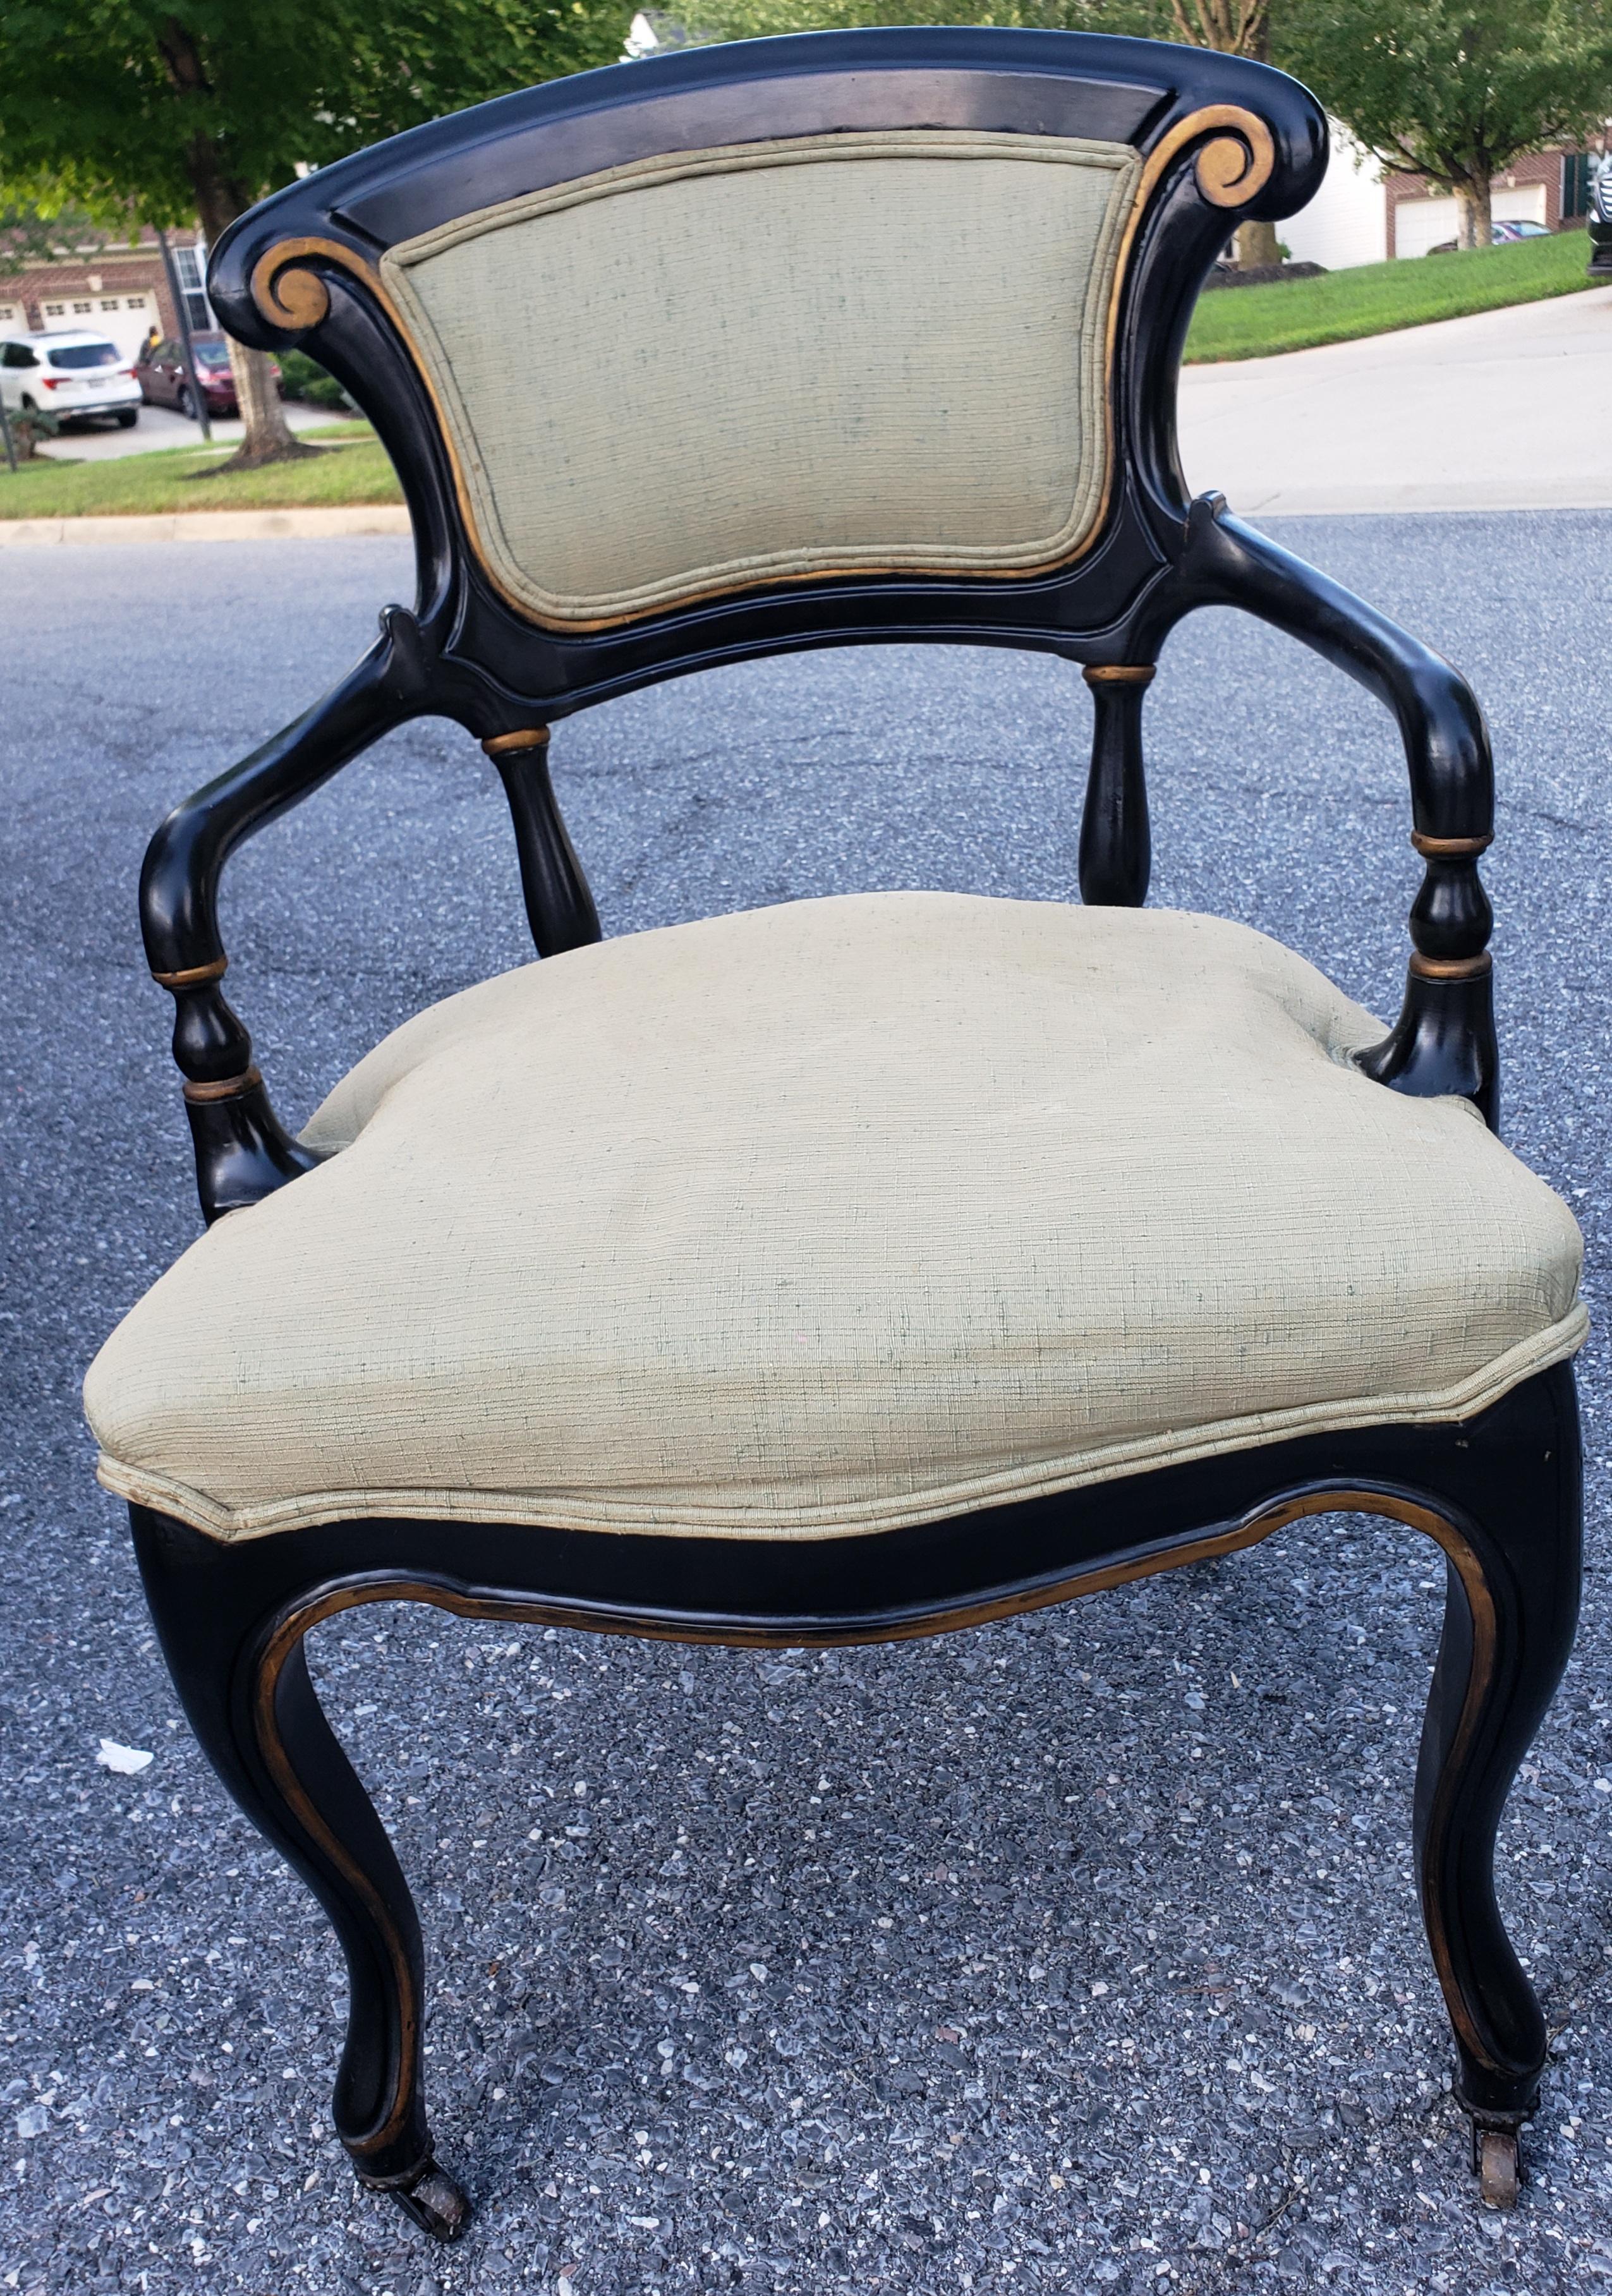 Upholstery 19th C. Rococo Gustavian Ebonized and Partial Gilt Upholstered ArmChairs, Pair For Sale